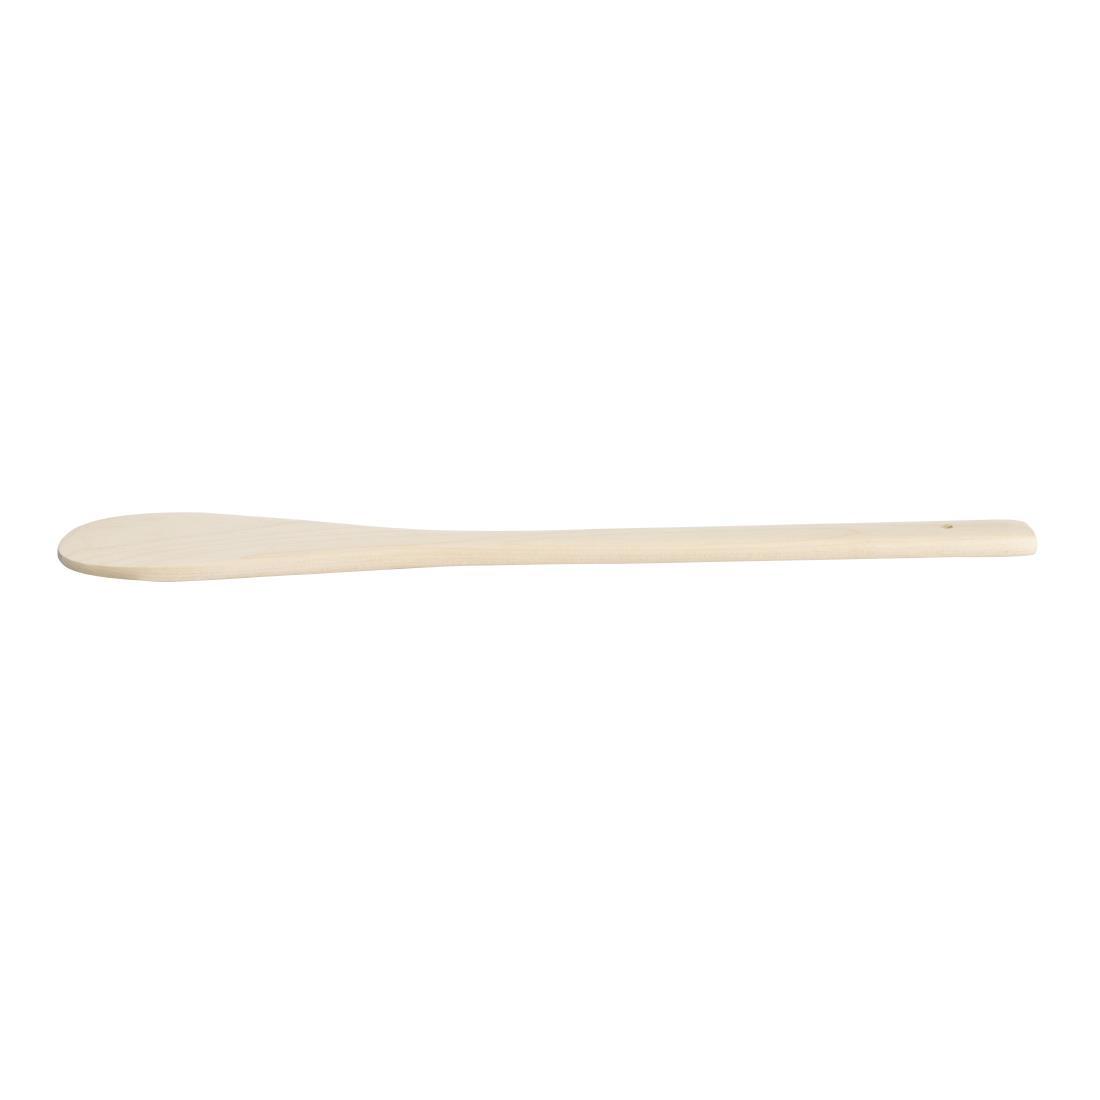 Vogue Round Ended Wooden Spatula 12" - J113  - 2